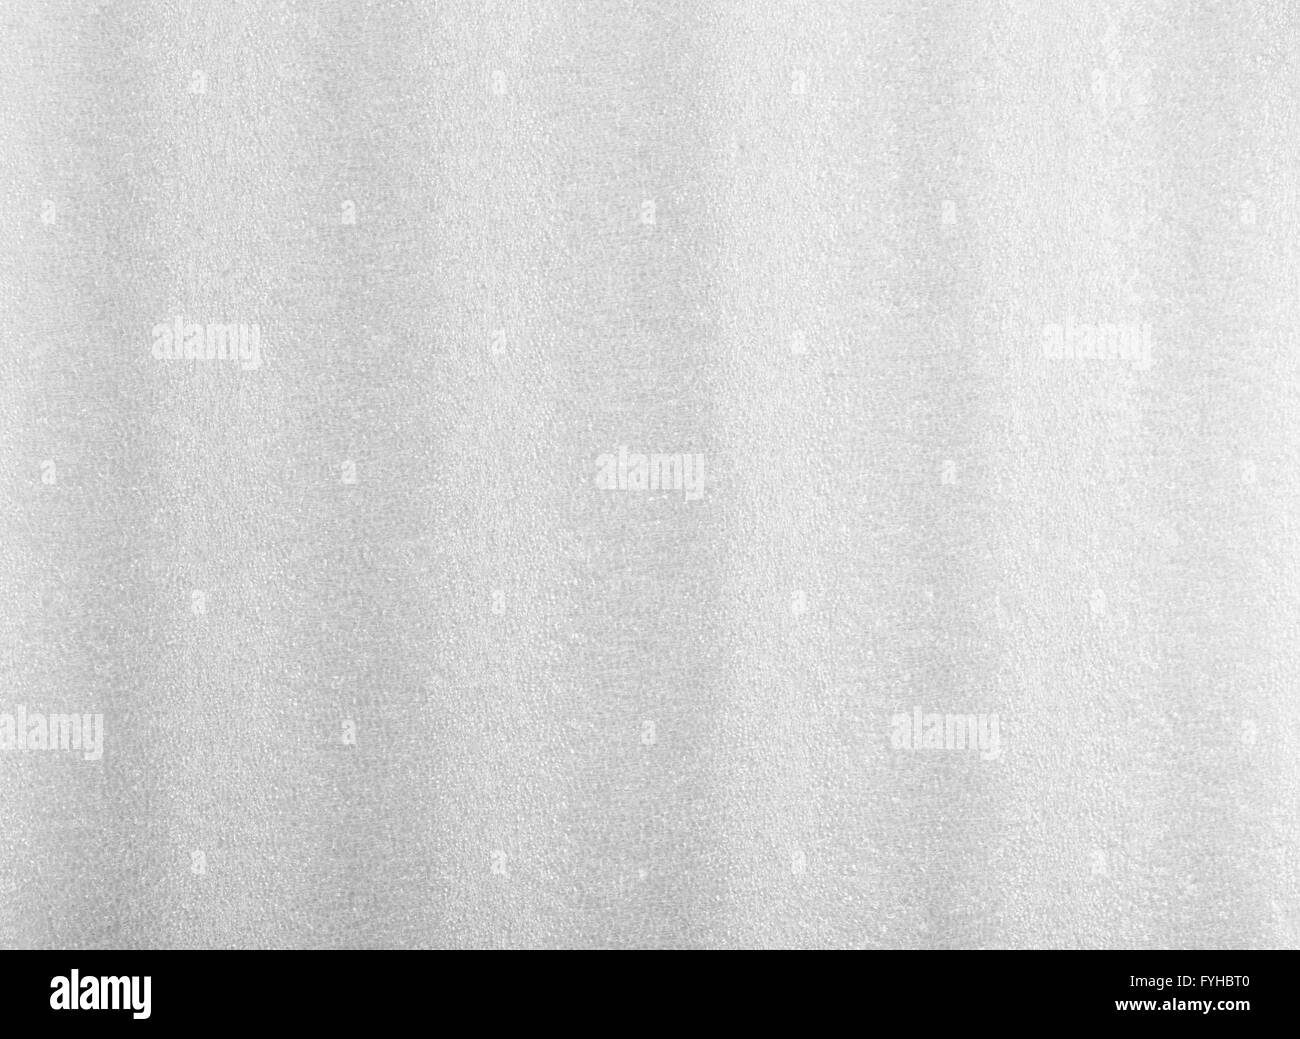 White Packing Foam Texture Background with Copy Space. Stock Photo